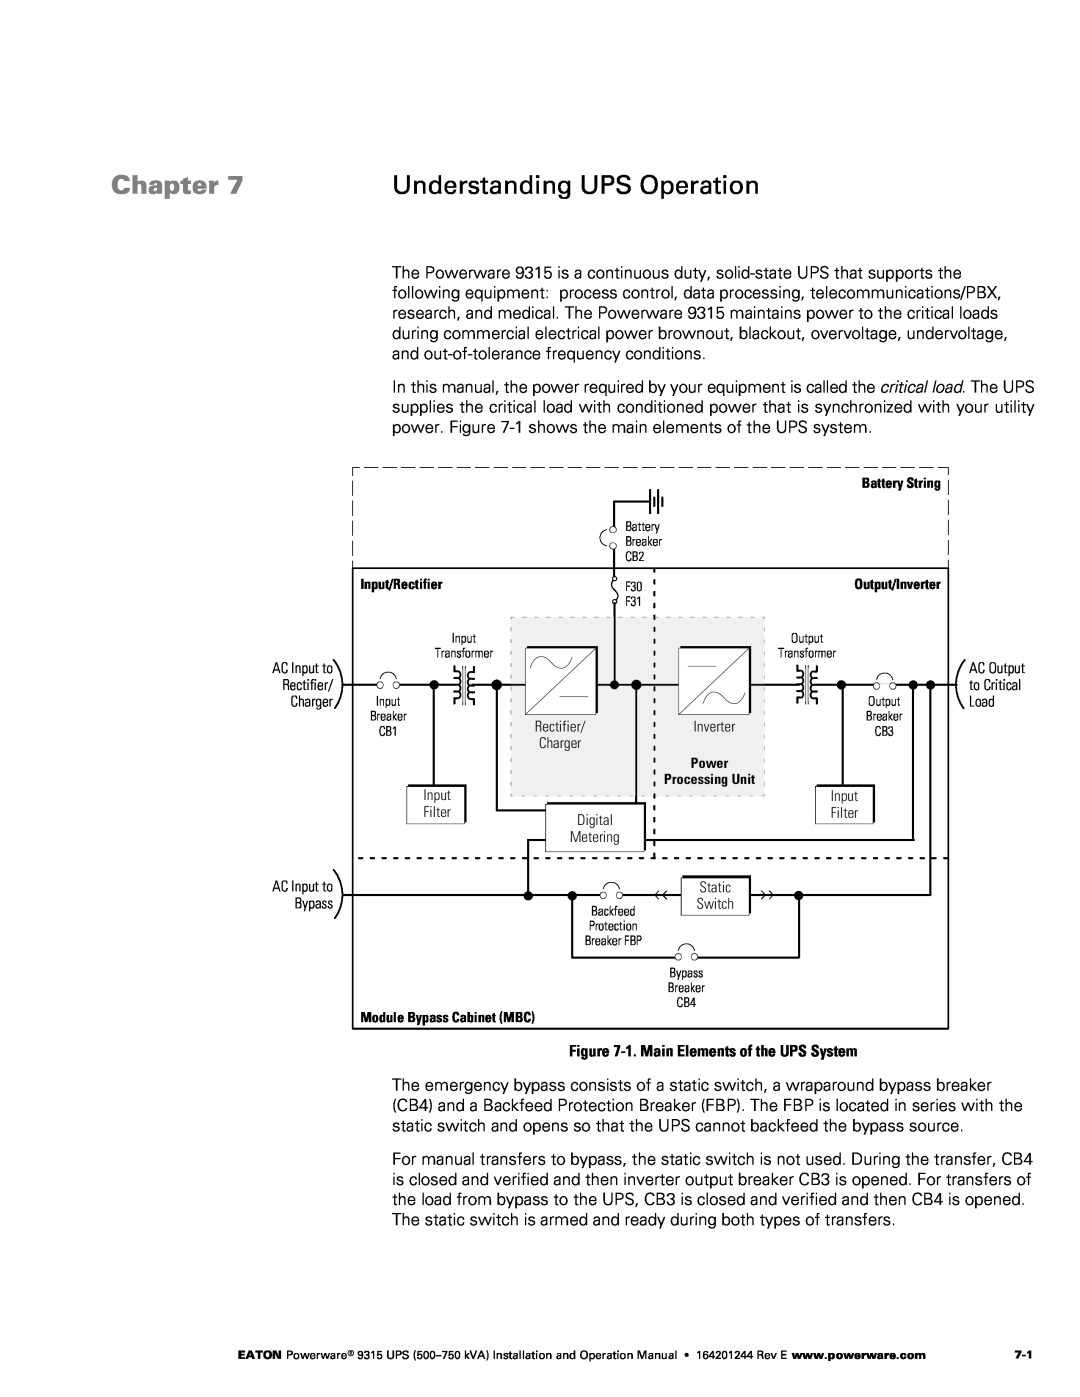 Powerware Powerware 9315 Understanding UPS Operation, Chapter, ‐1. Main Elements of the UPS System, Battery String 